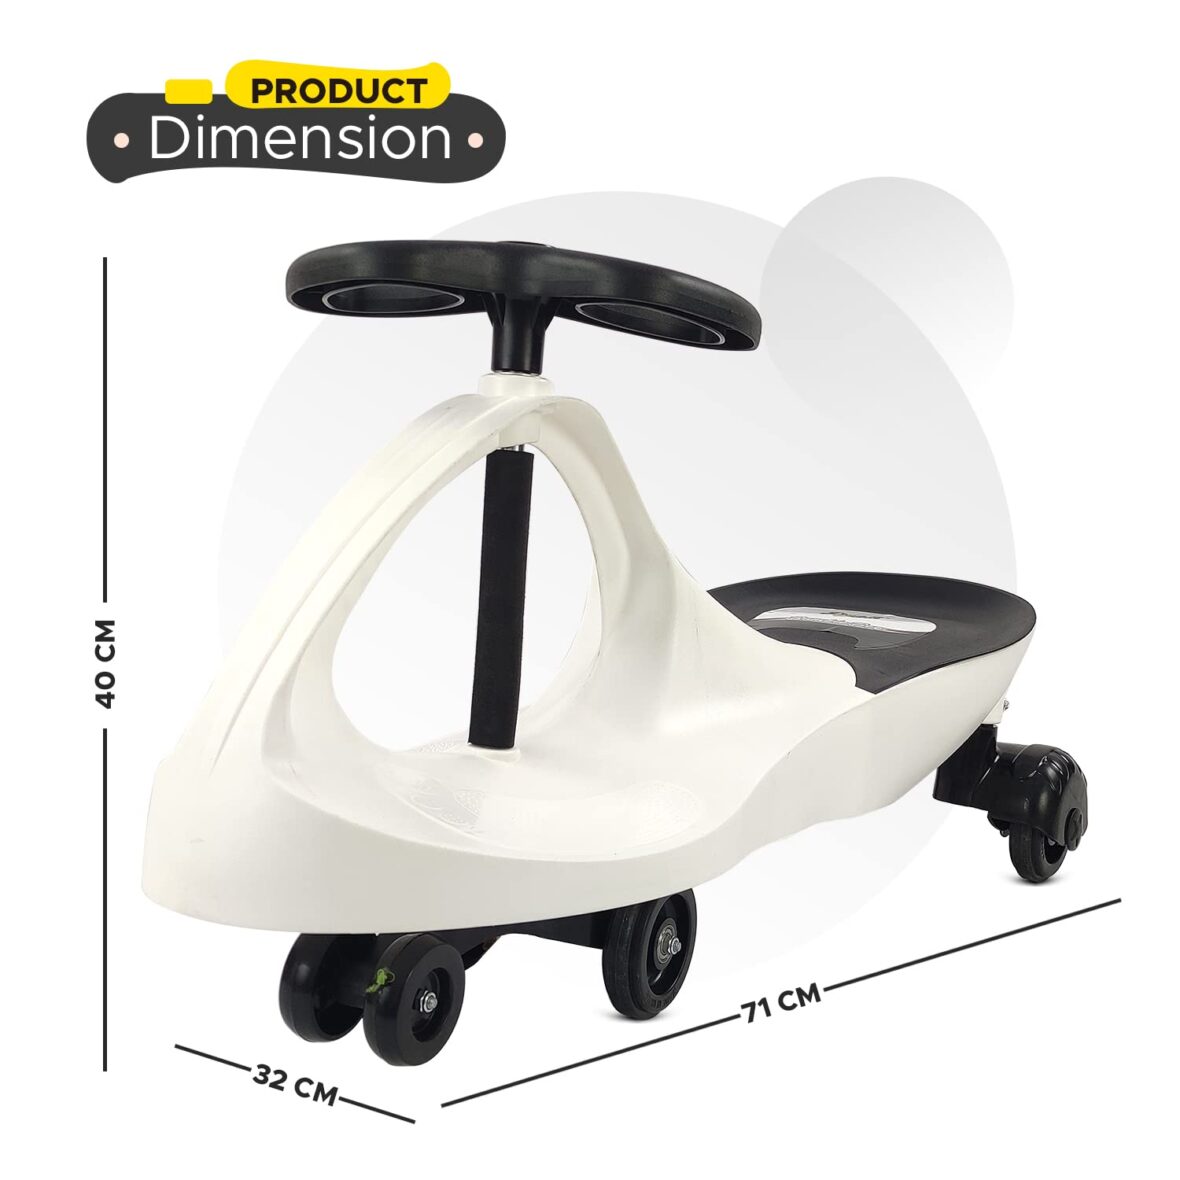 Dash Deluxe Bumble Bee Magic Swing Car with Music, Ride On, Swing Magic Car Ride On for Kids with Scratch Free Wheels , (Suitable for 3+ Years | 120 Kgs Weight Capacity, White )